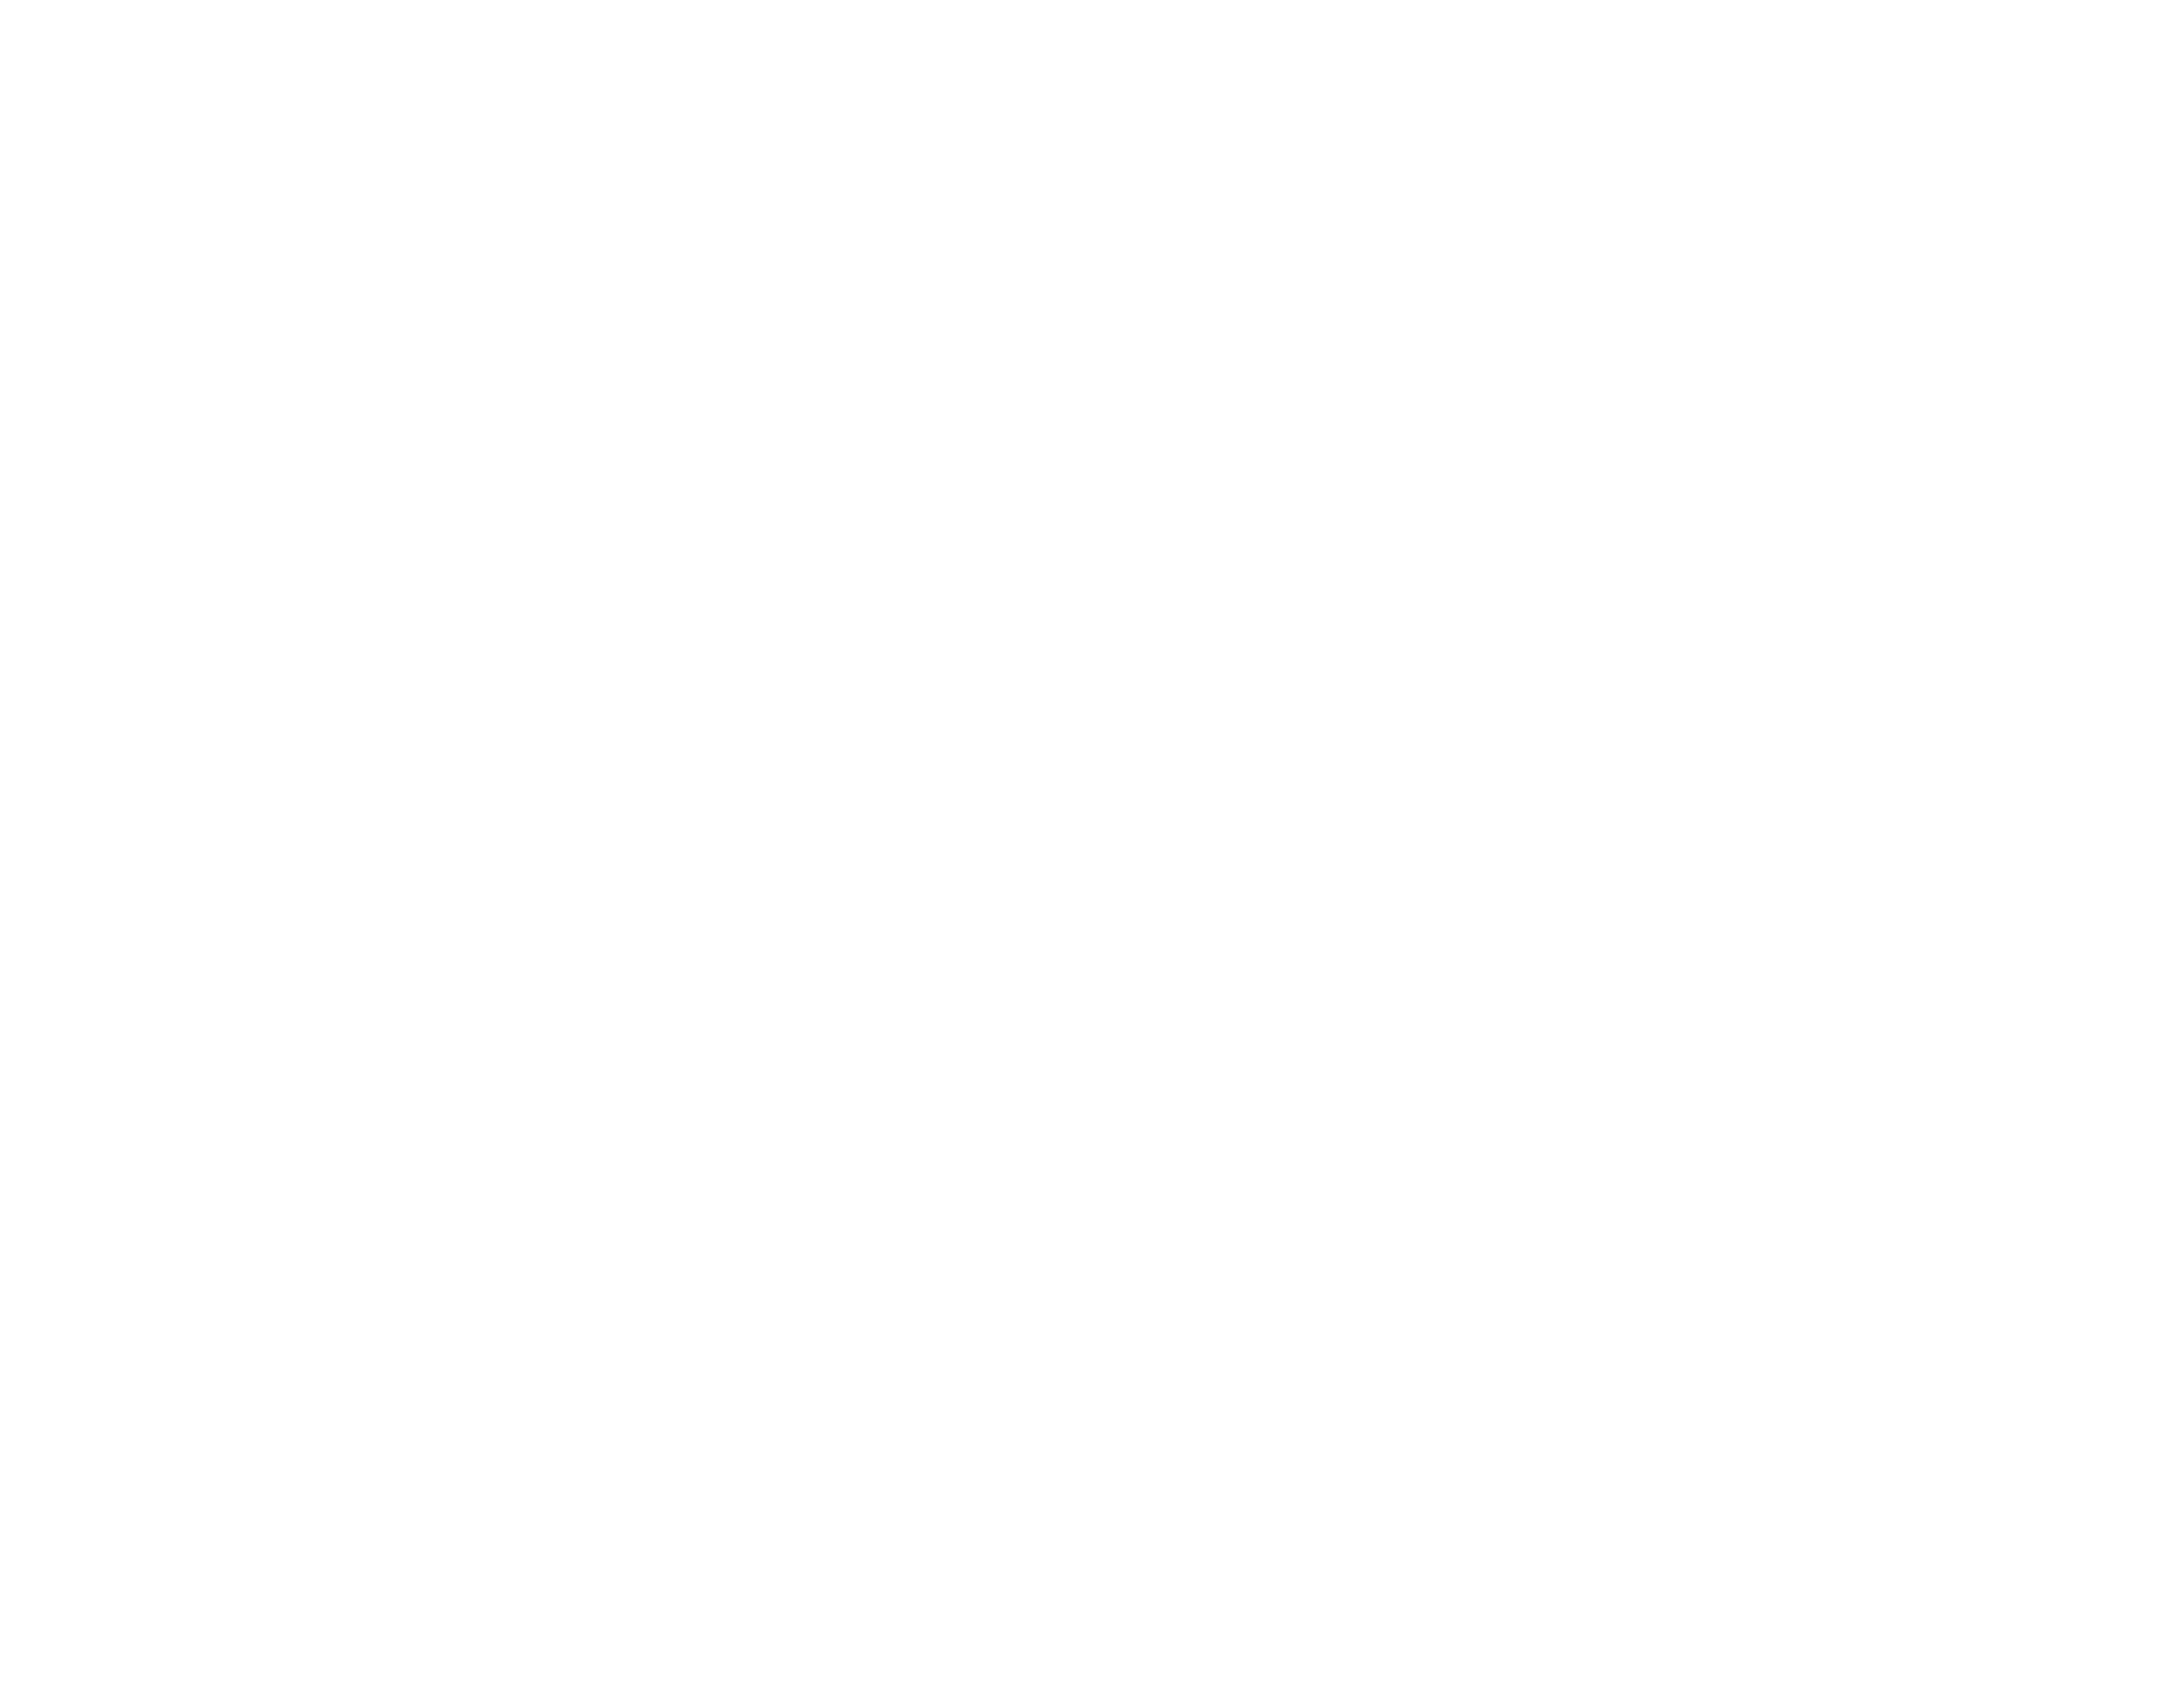 Made with pride